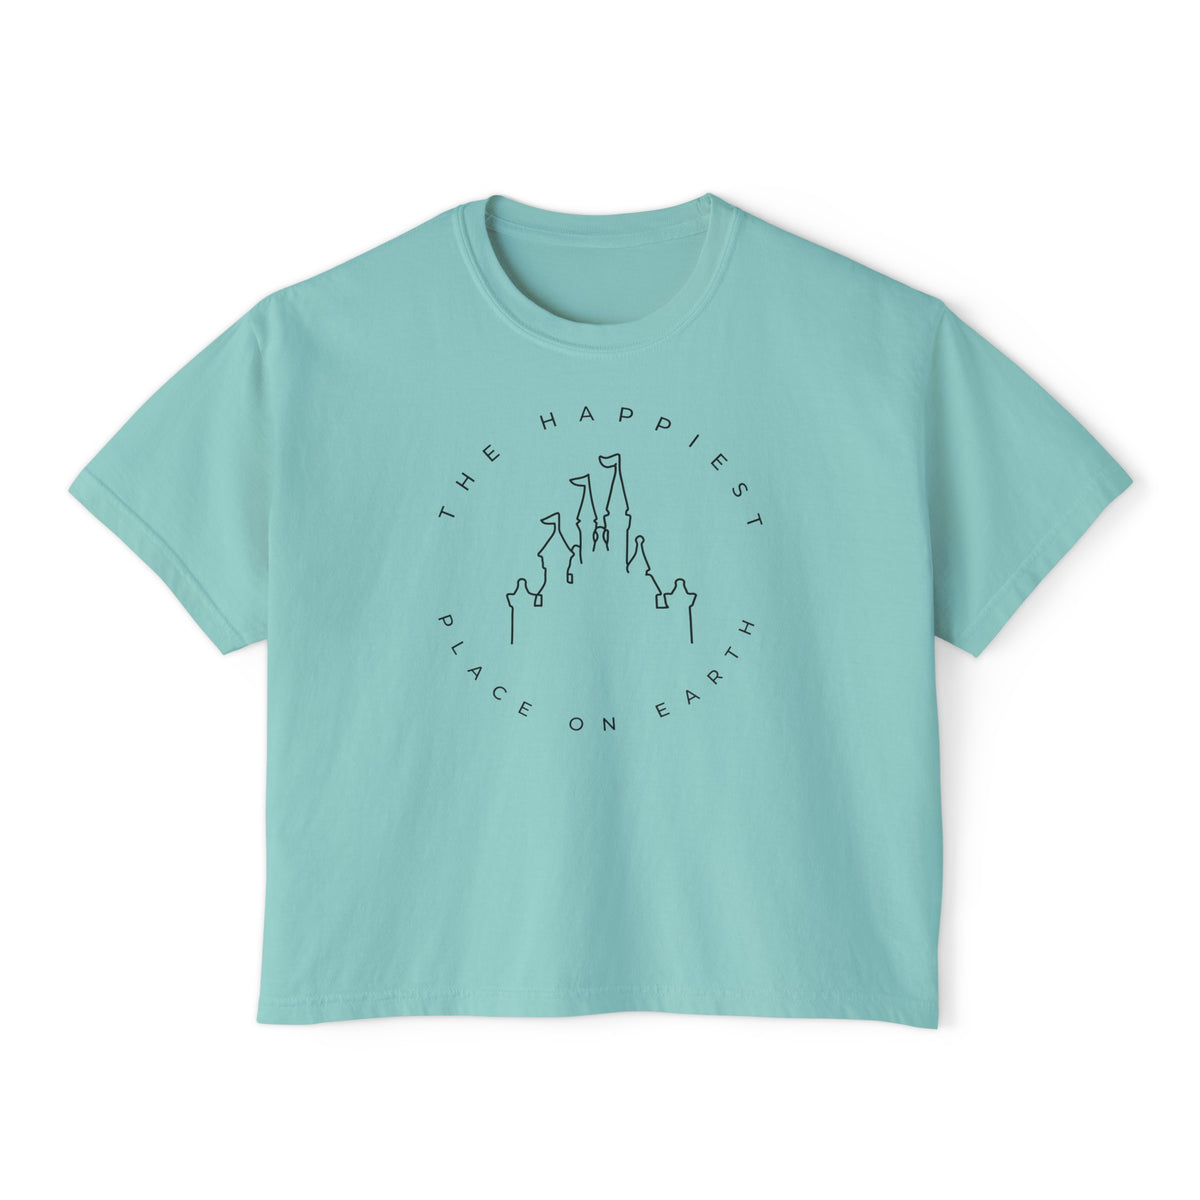 The Happiest Place On Earth Comfort Colors Women's Boxy Tee